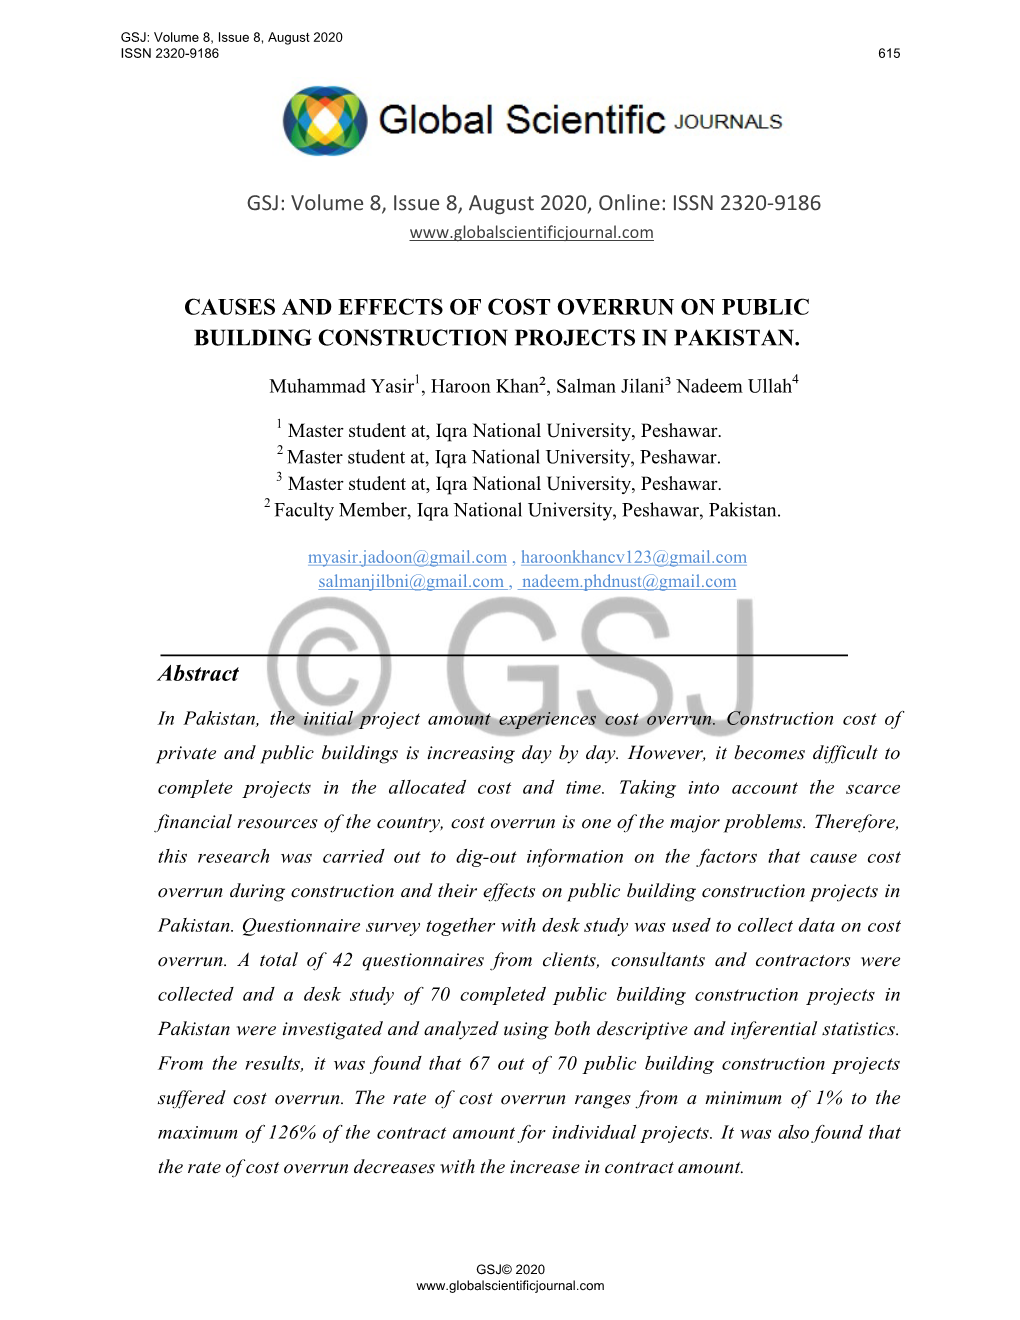 Issn 2320-9186 Causes and Effects of Cost Overrun on Public Building Construction P